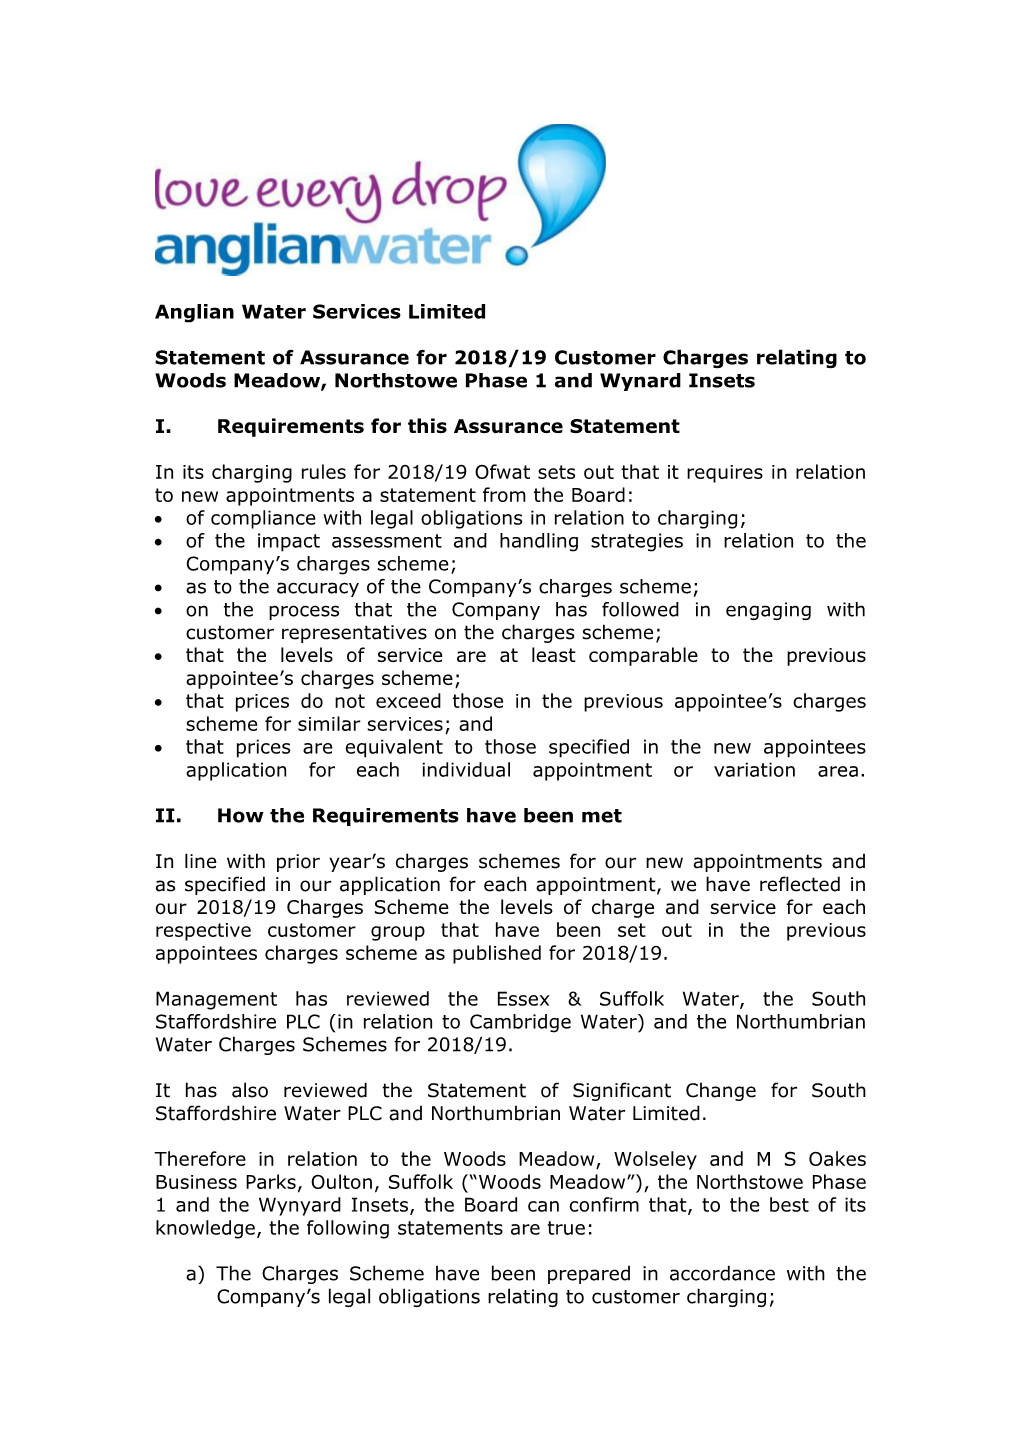 Anglian Water Services Limited Statement of Assurance for 2018/19